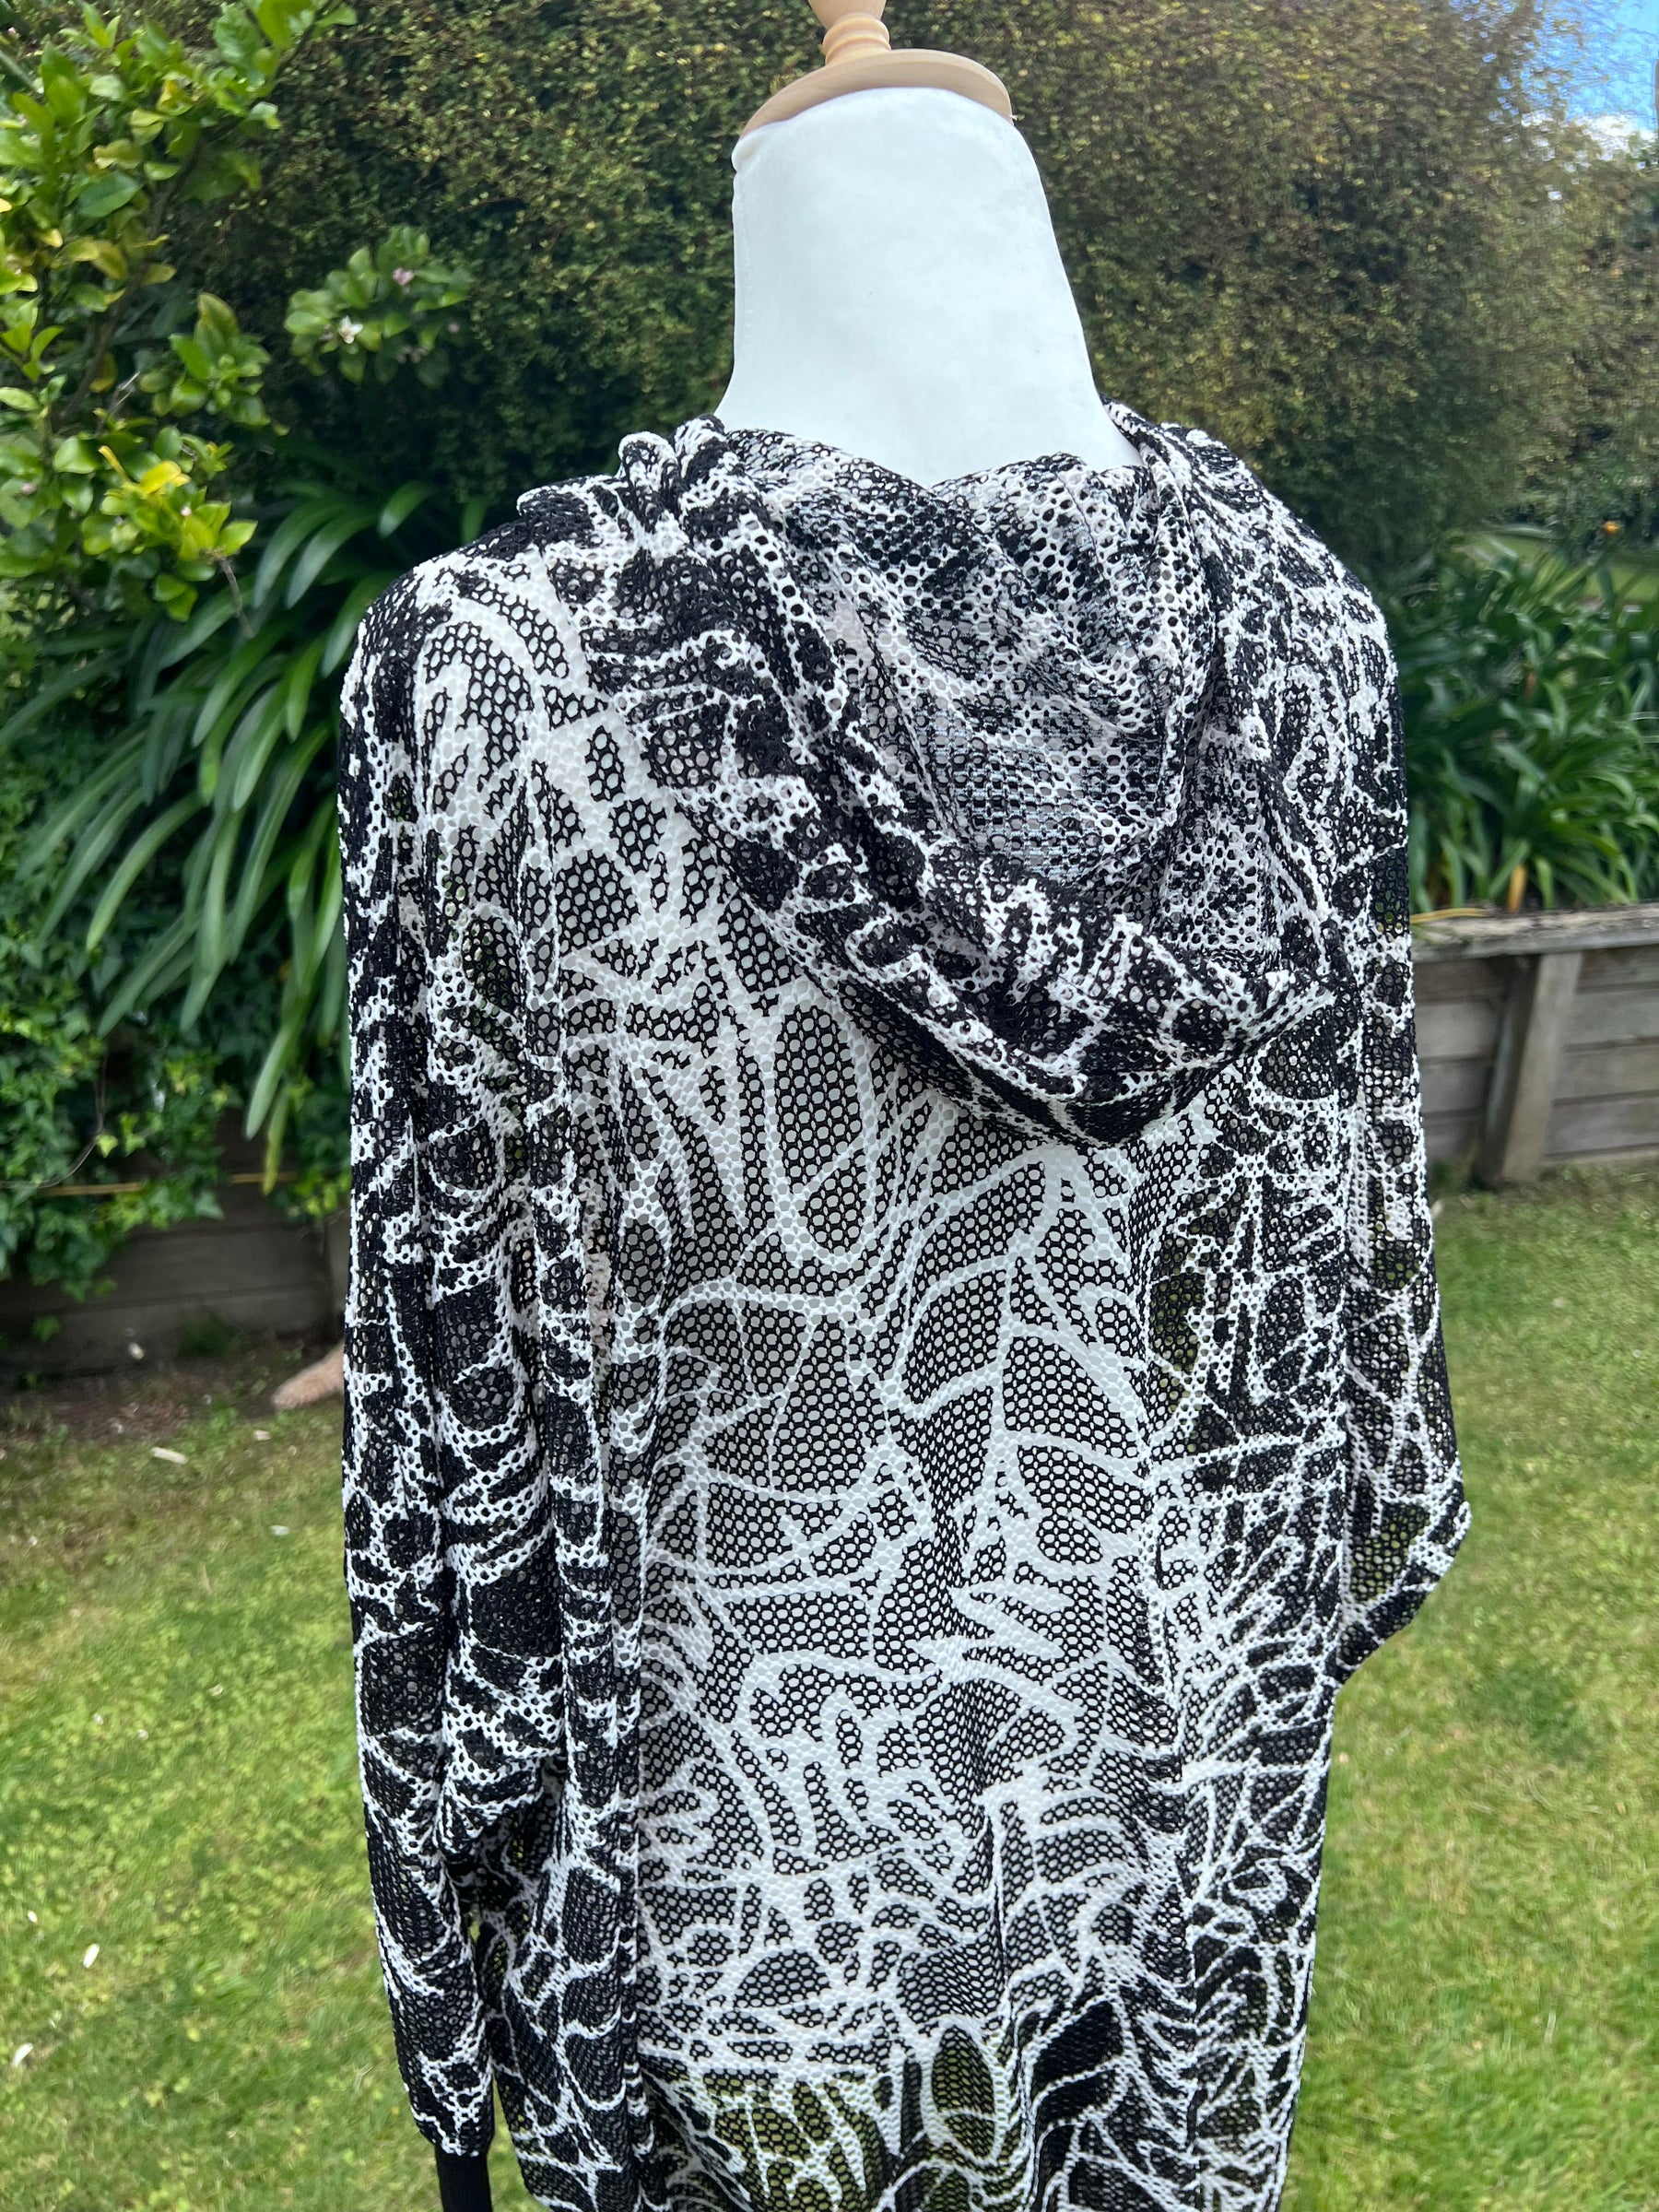 Bianca, Black and White Patterned Mesh Hoodie, 2 sizes